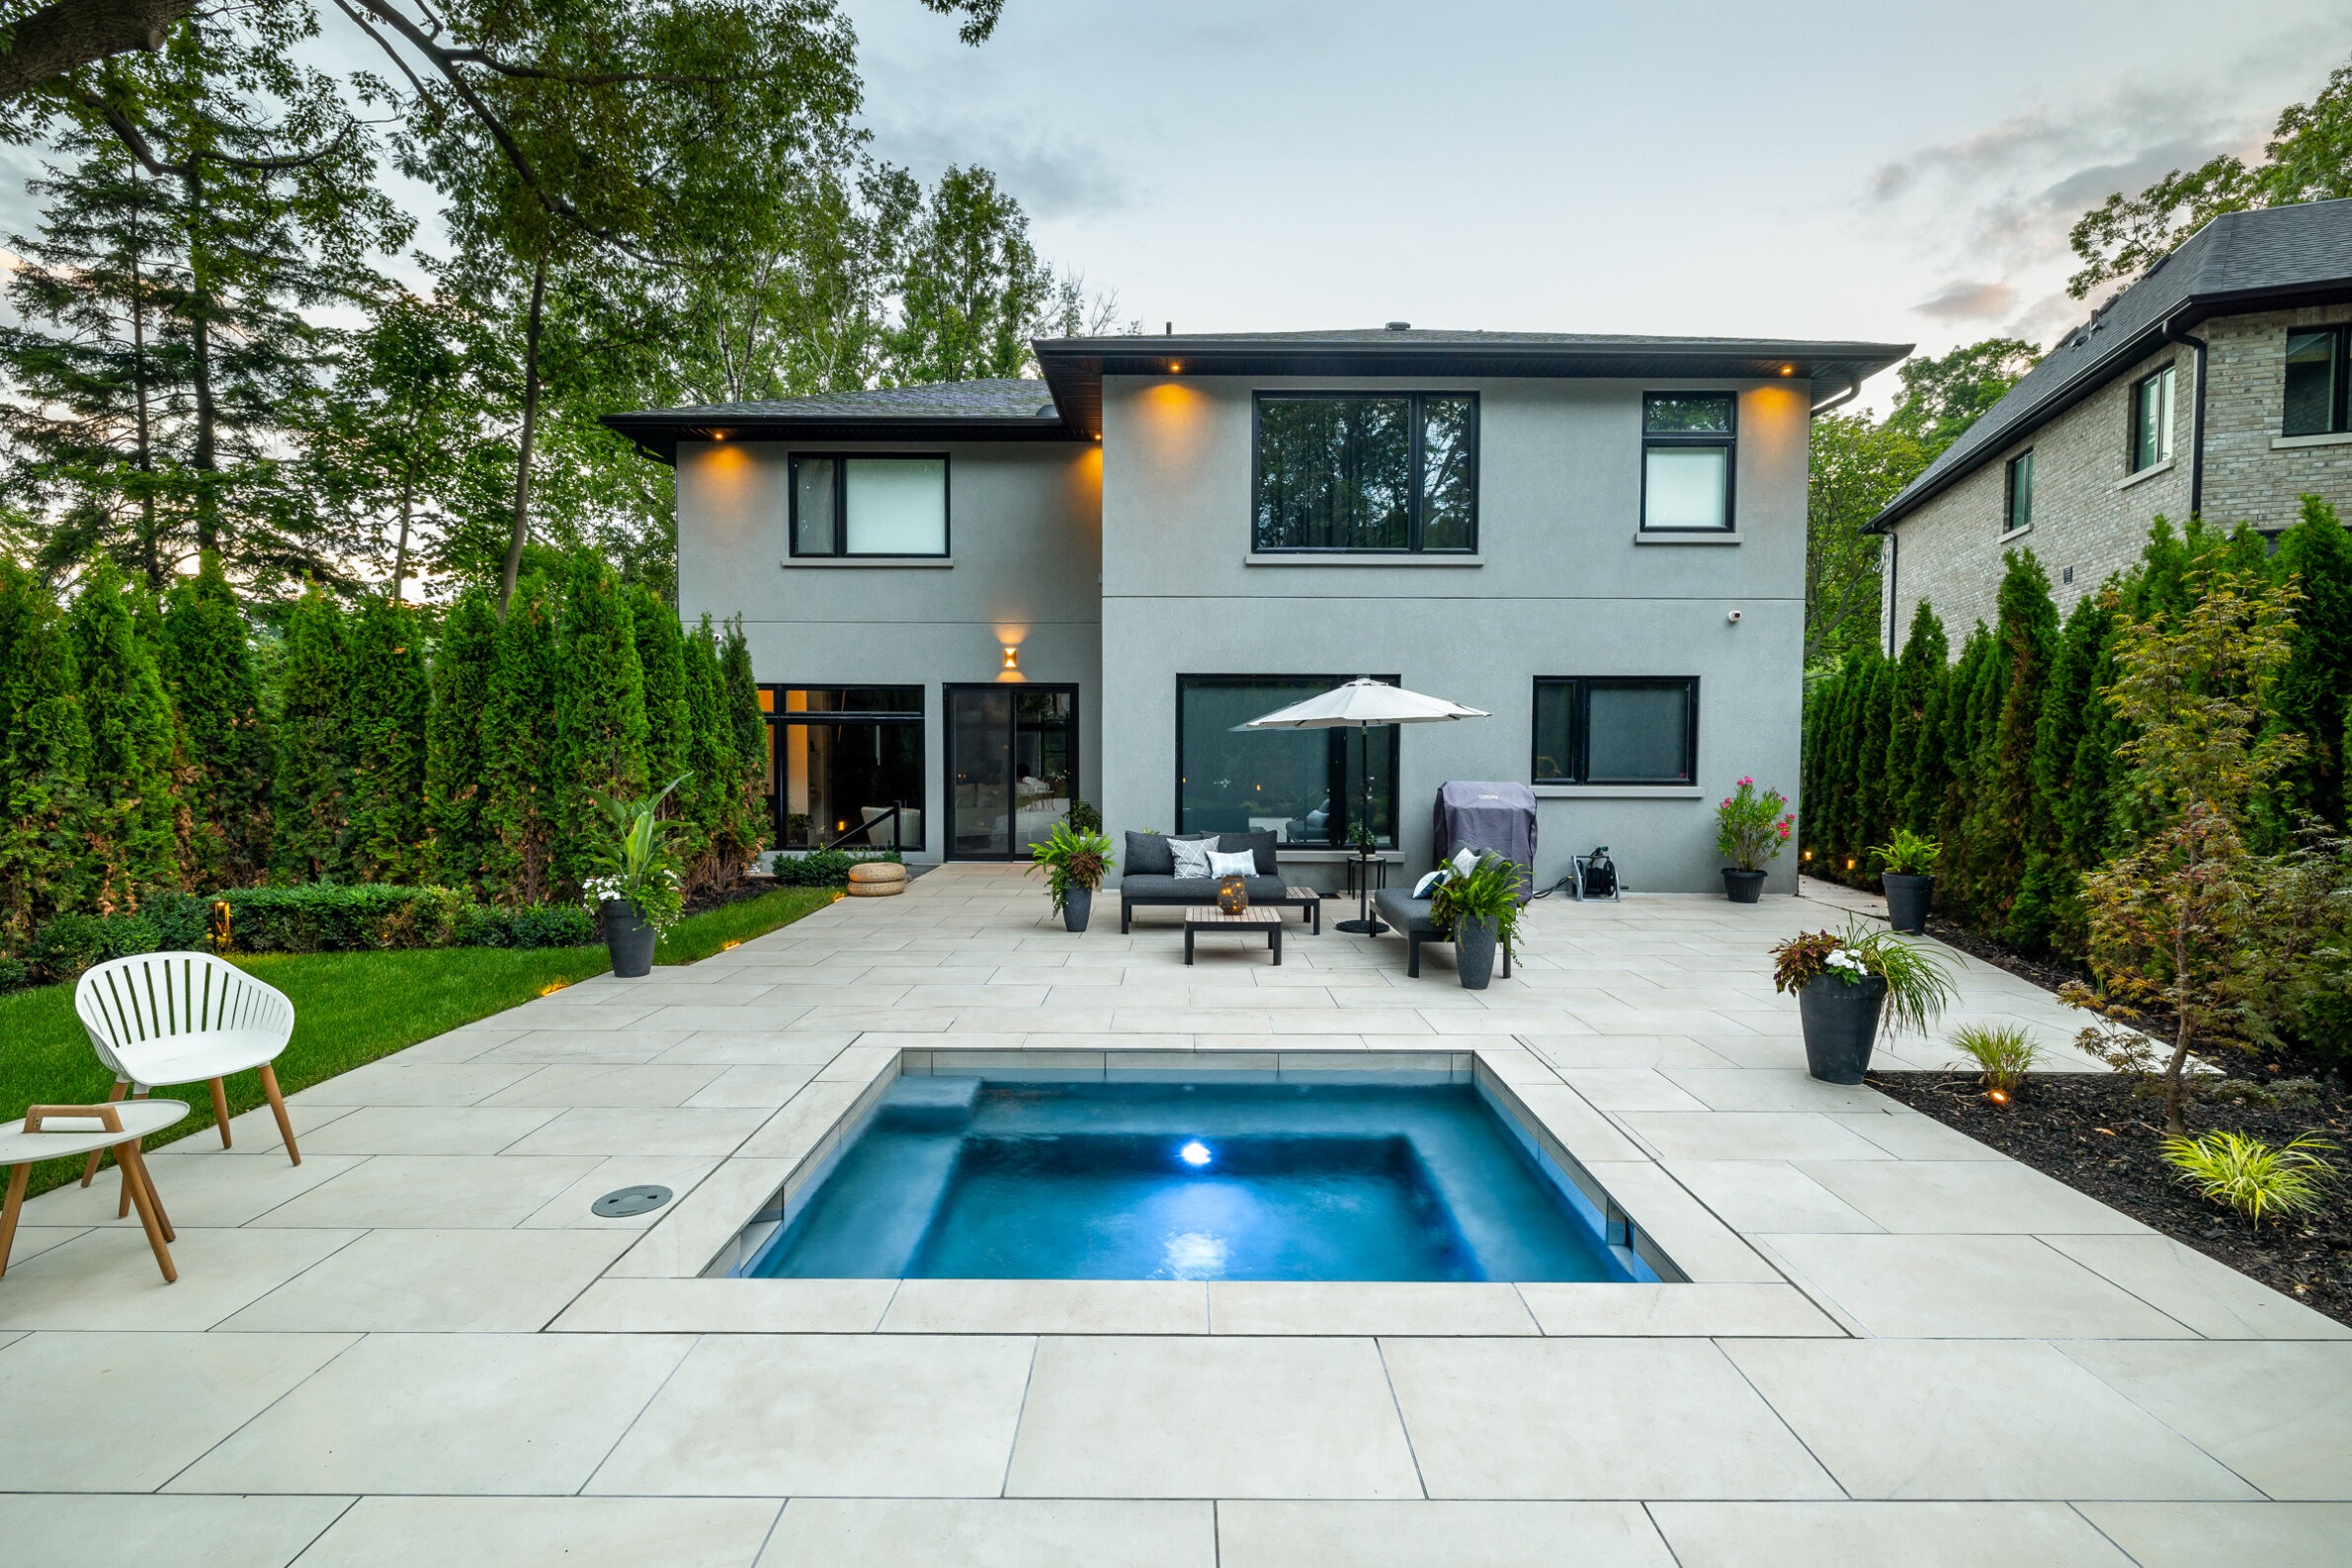 Modern two-story house with a flat roof, an outdoor seating area, and a small pool. Surrounded by lush greenery and a tiled patio space.